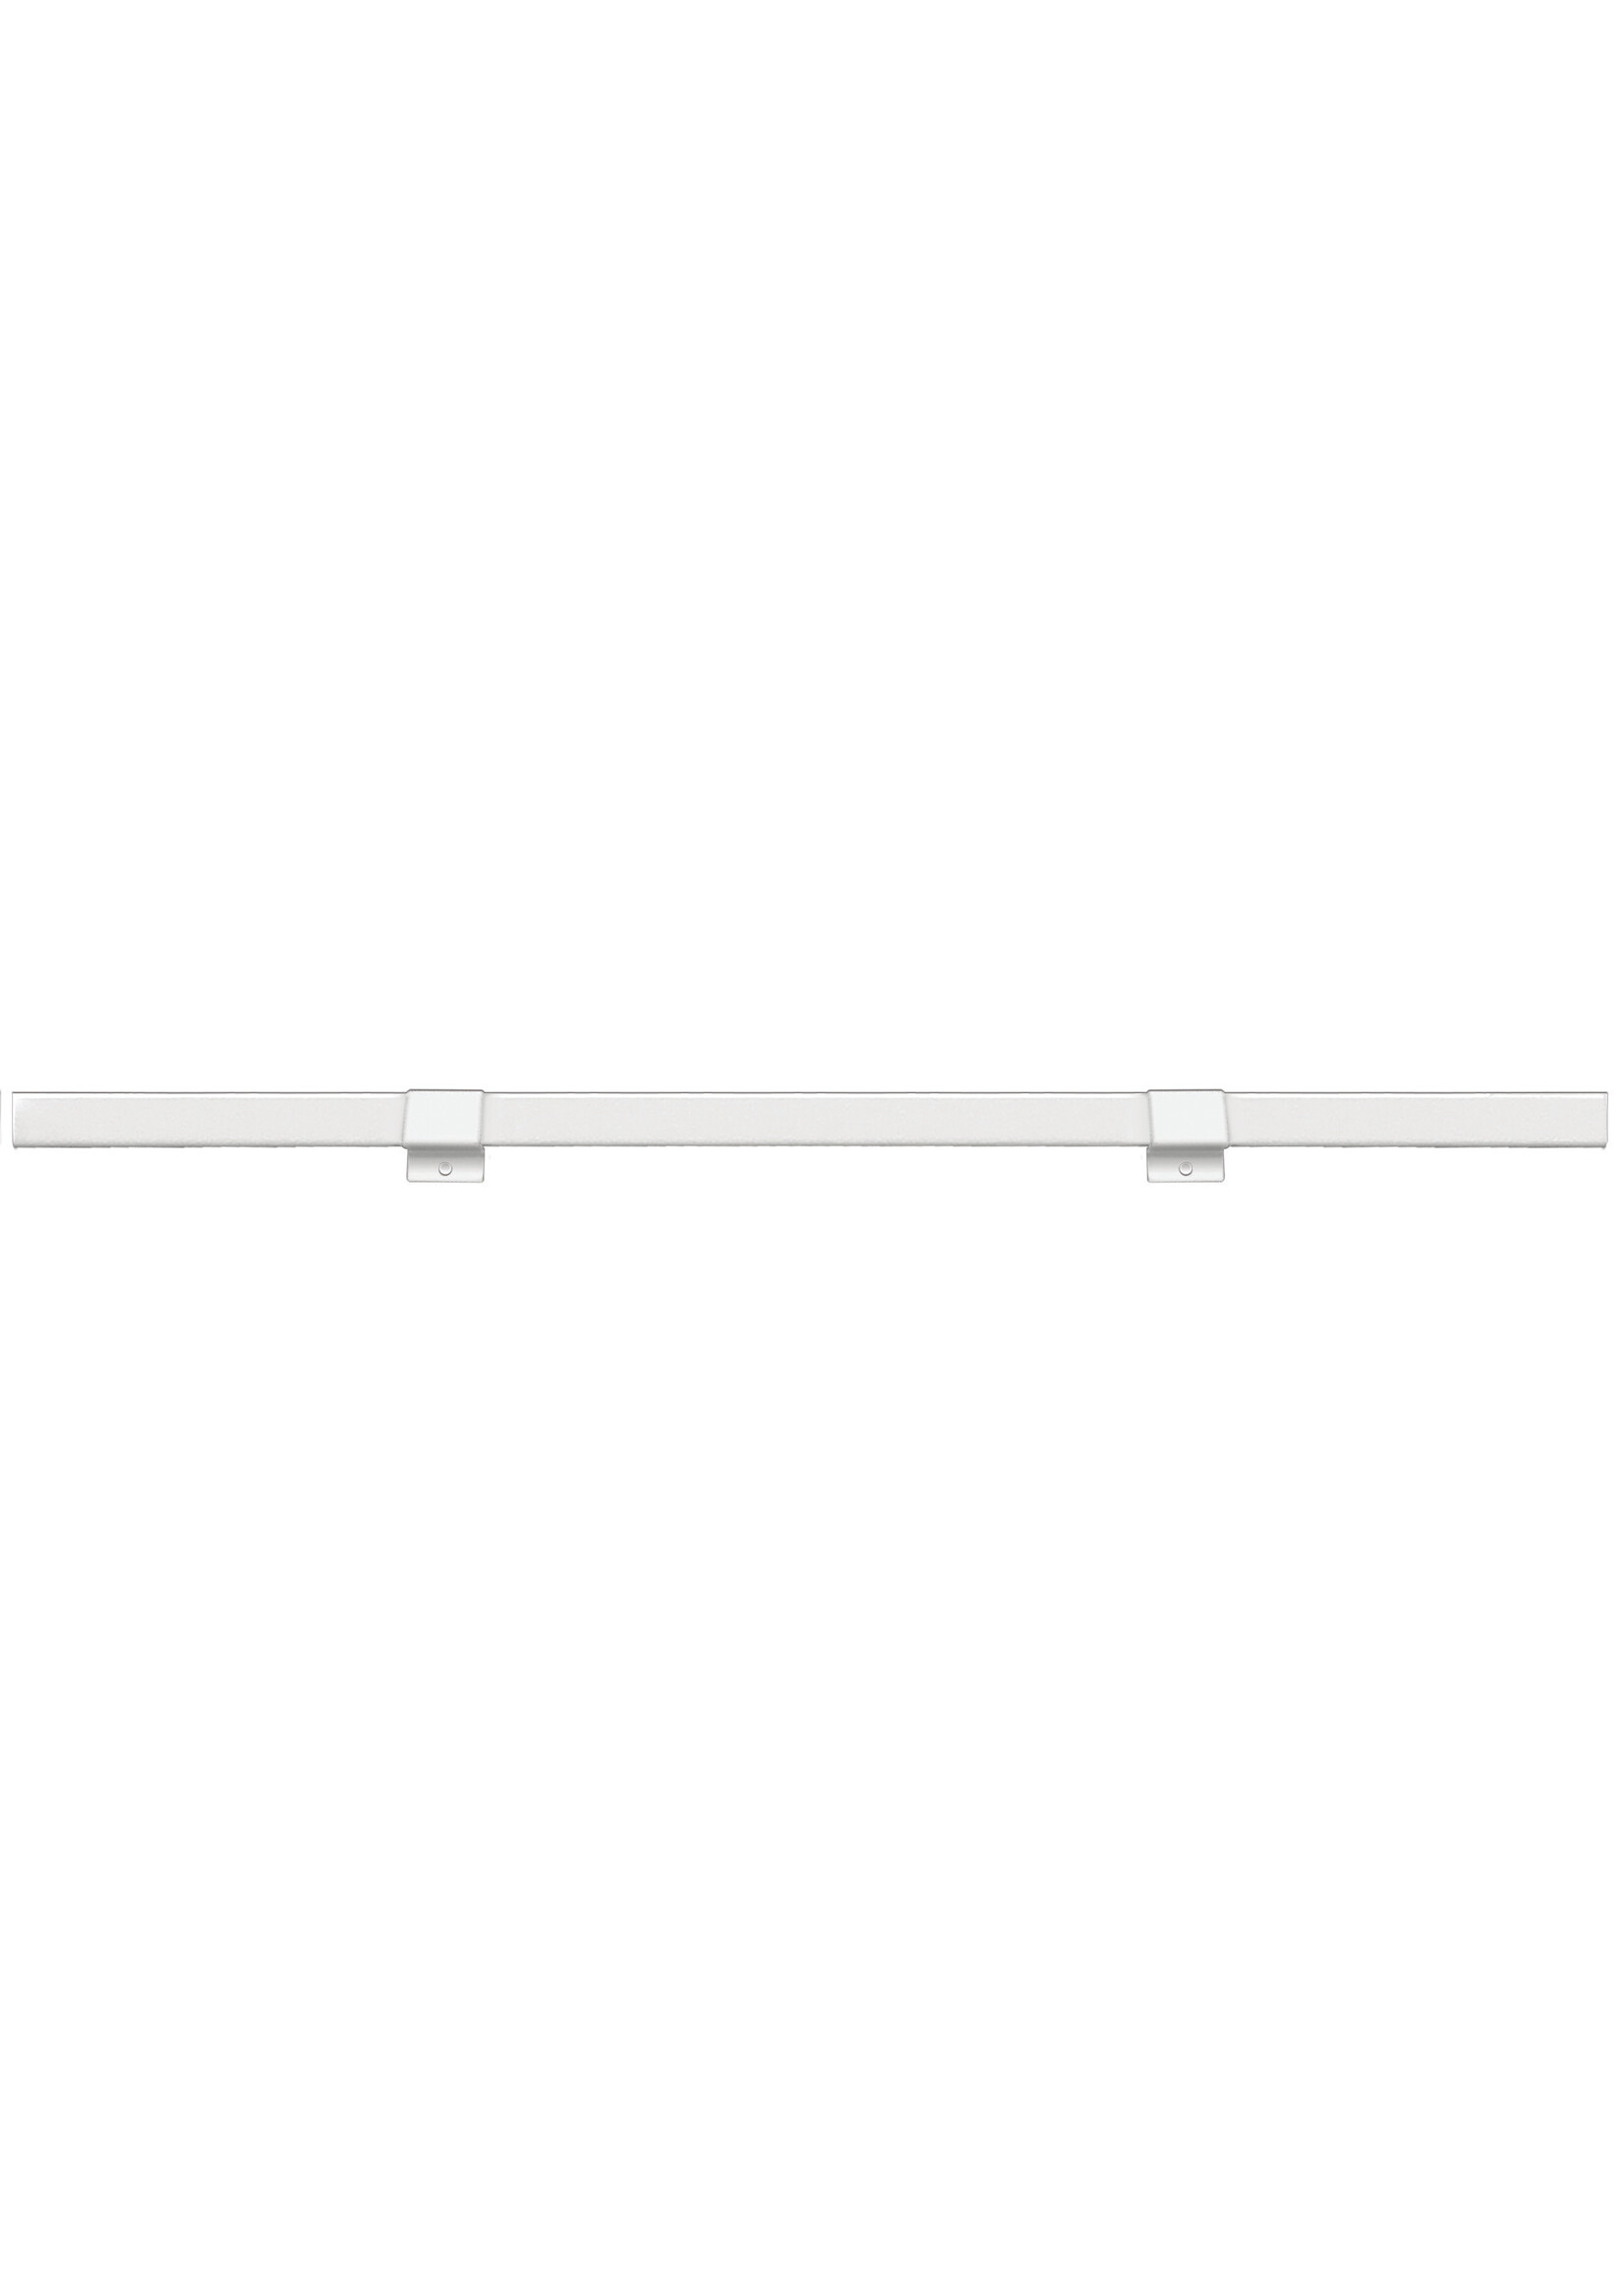 Fast Fit Fast Fit Light Hanging Bar for 2 ft x 4 ft